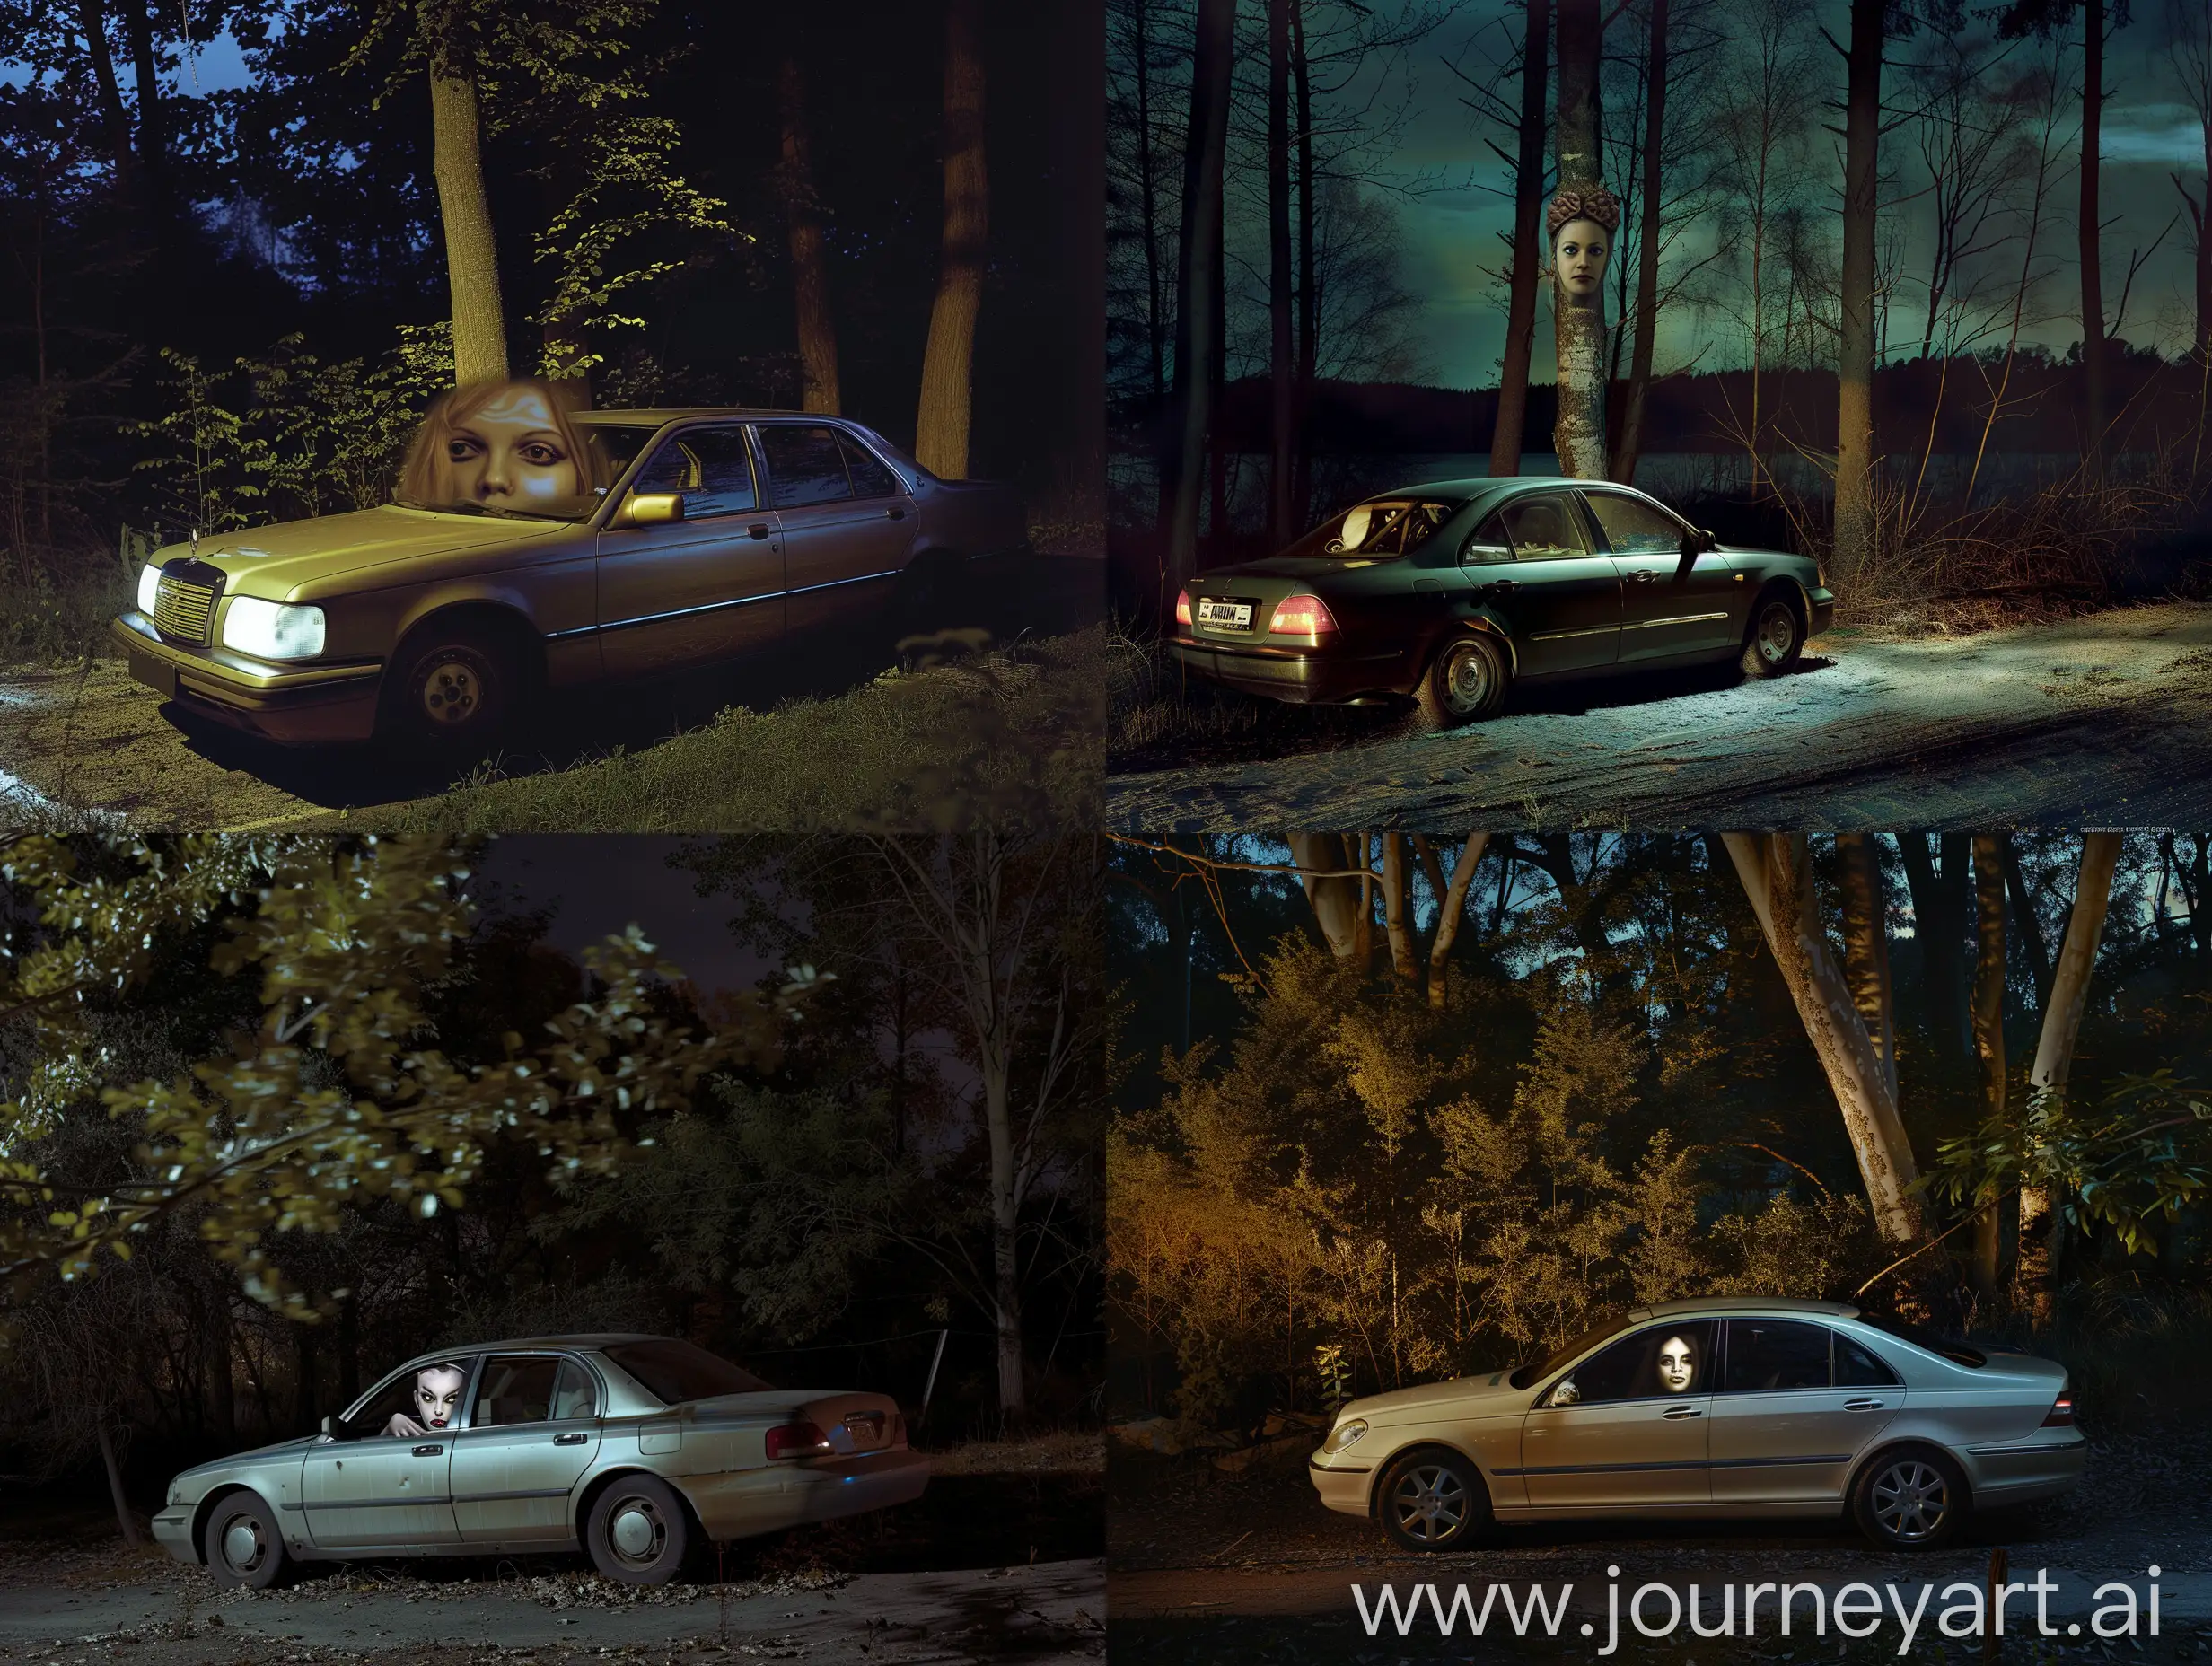 A car. She has a woman human face. She is parked near a forest at night. Realistic photograph, full body picture.